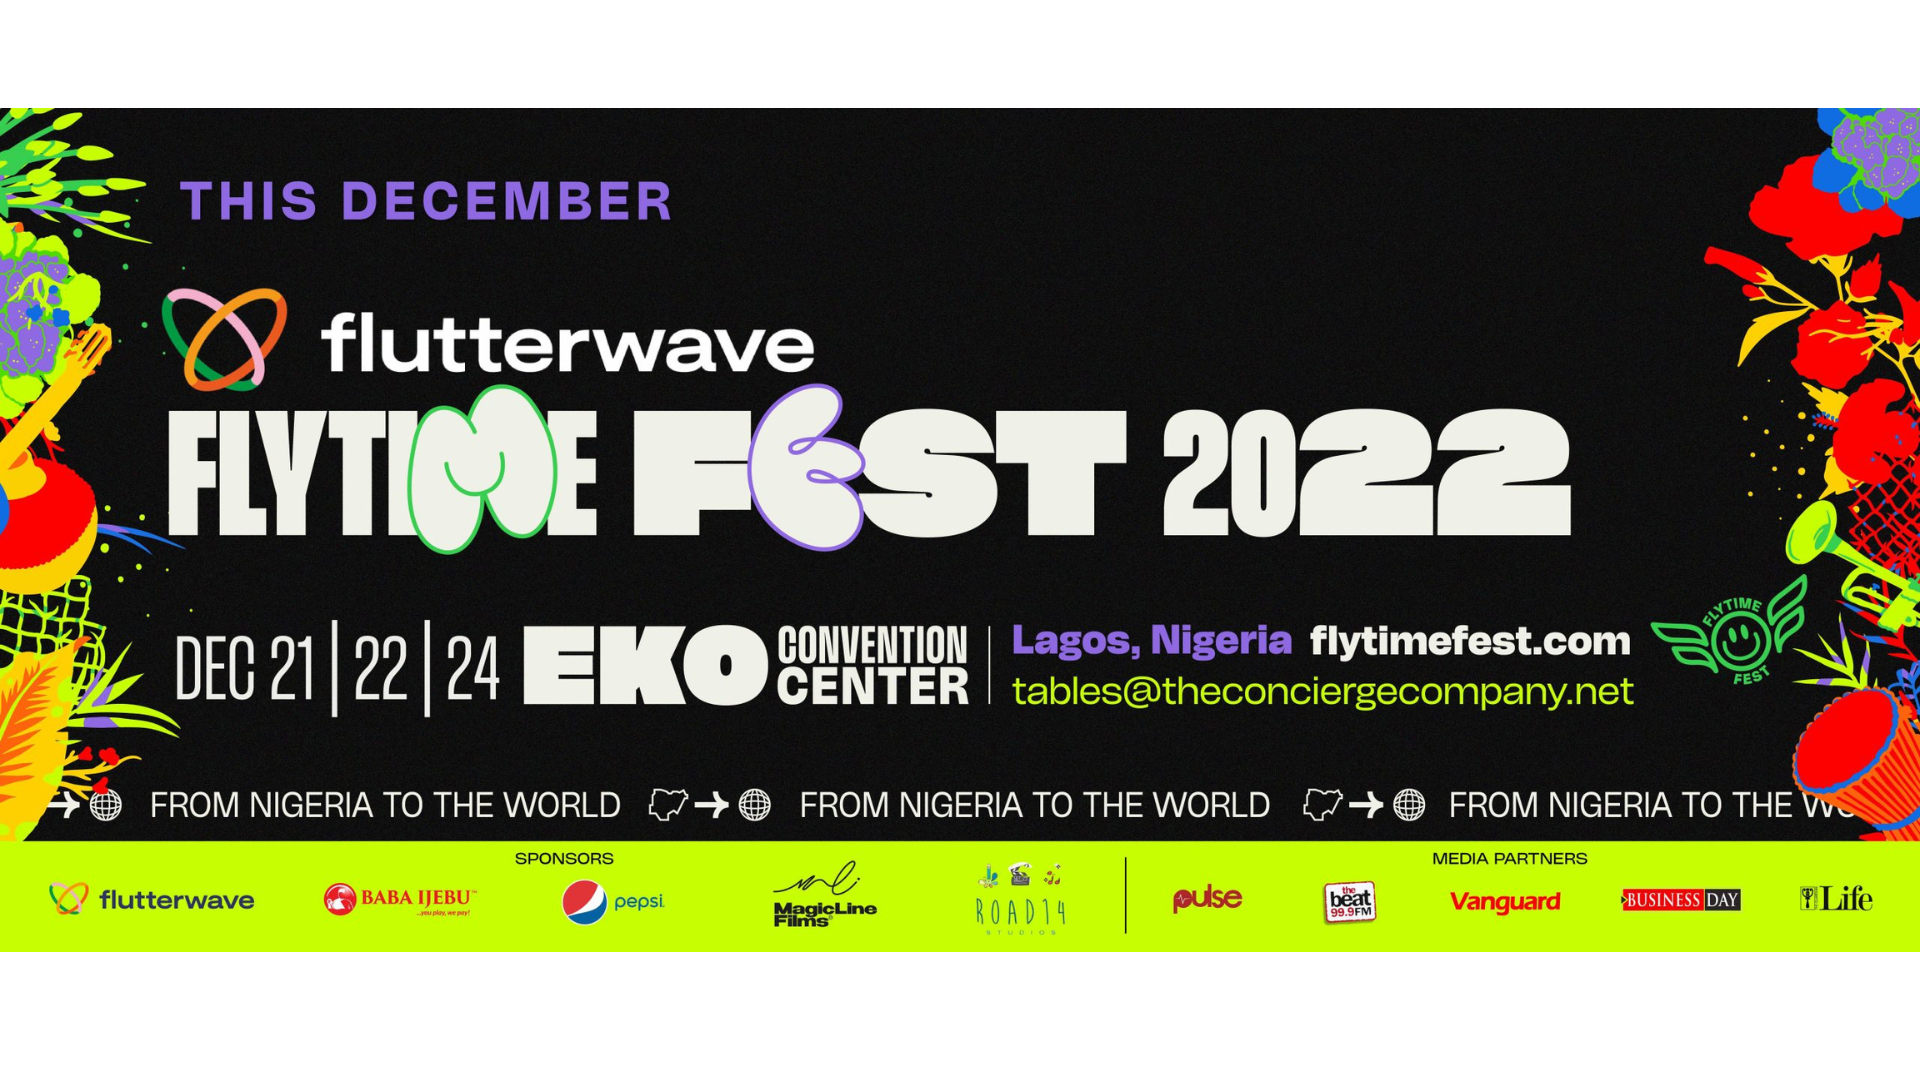 Flytime Fest 2023 is here! From Dec 21st to 25th, at the Eko Convention Center in Lagos, you can revel in non-stop music and entertainment.